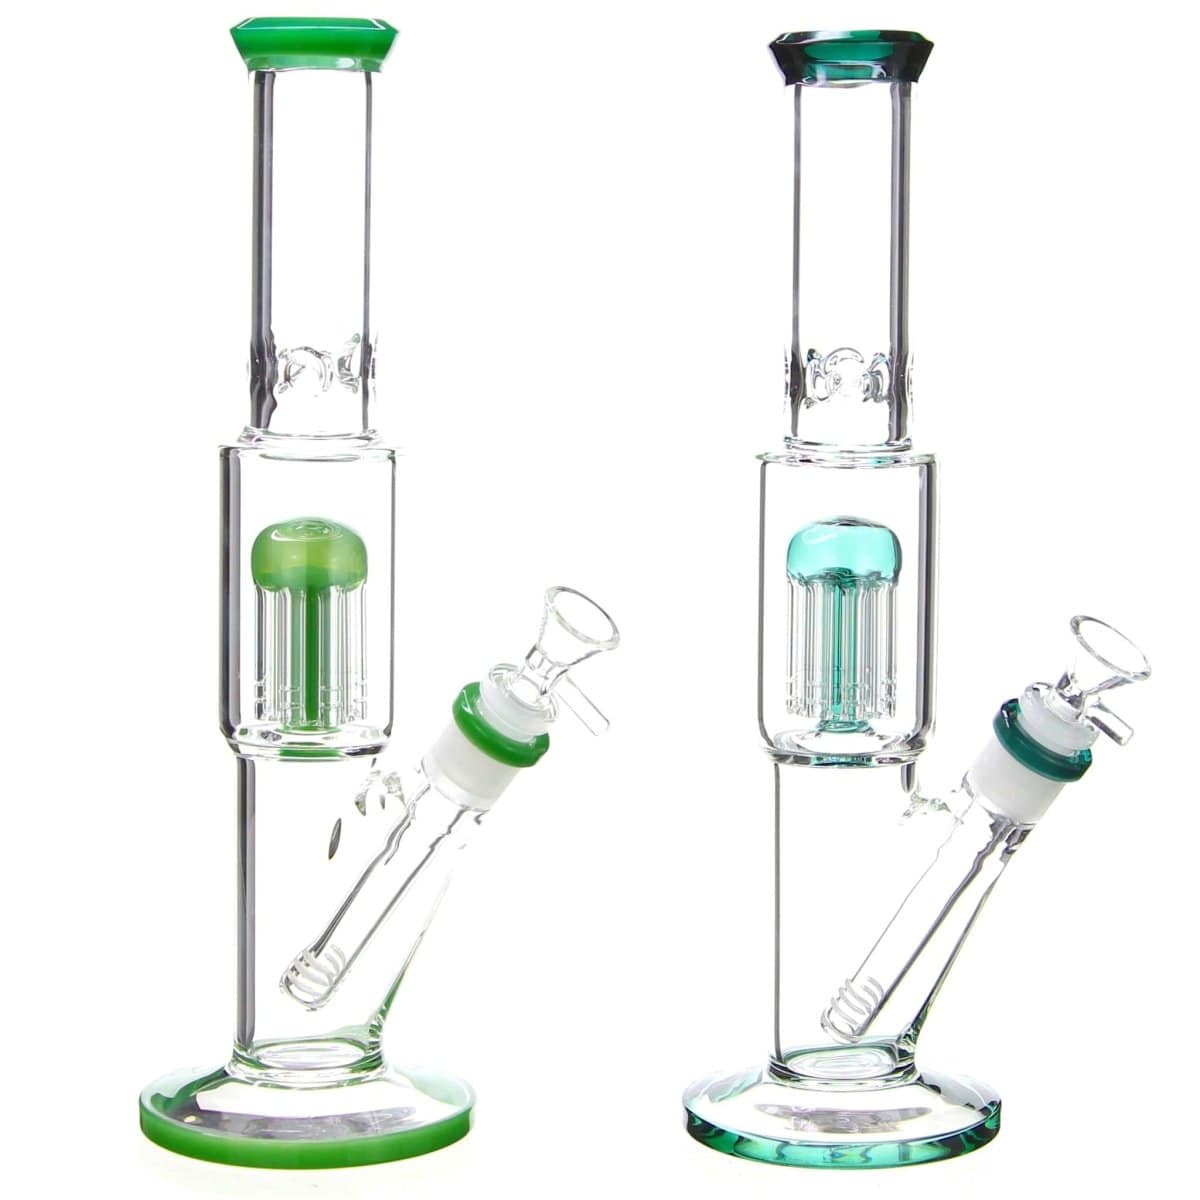 Benext Generation Glass Canned Jellyfish Straight Tube